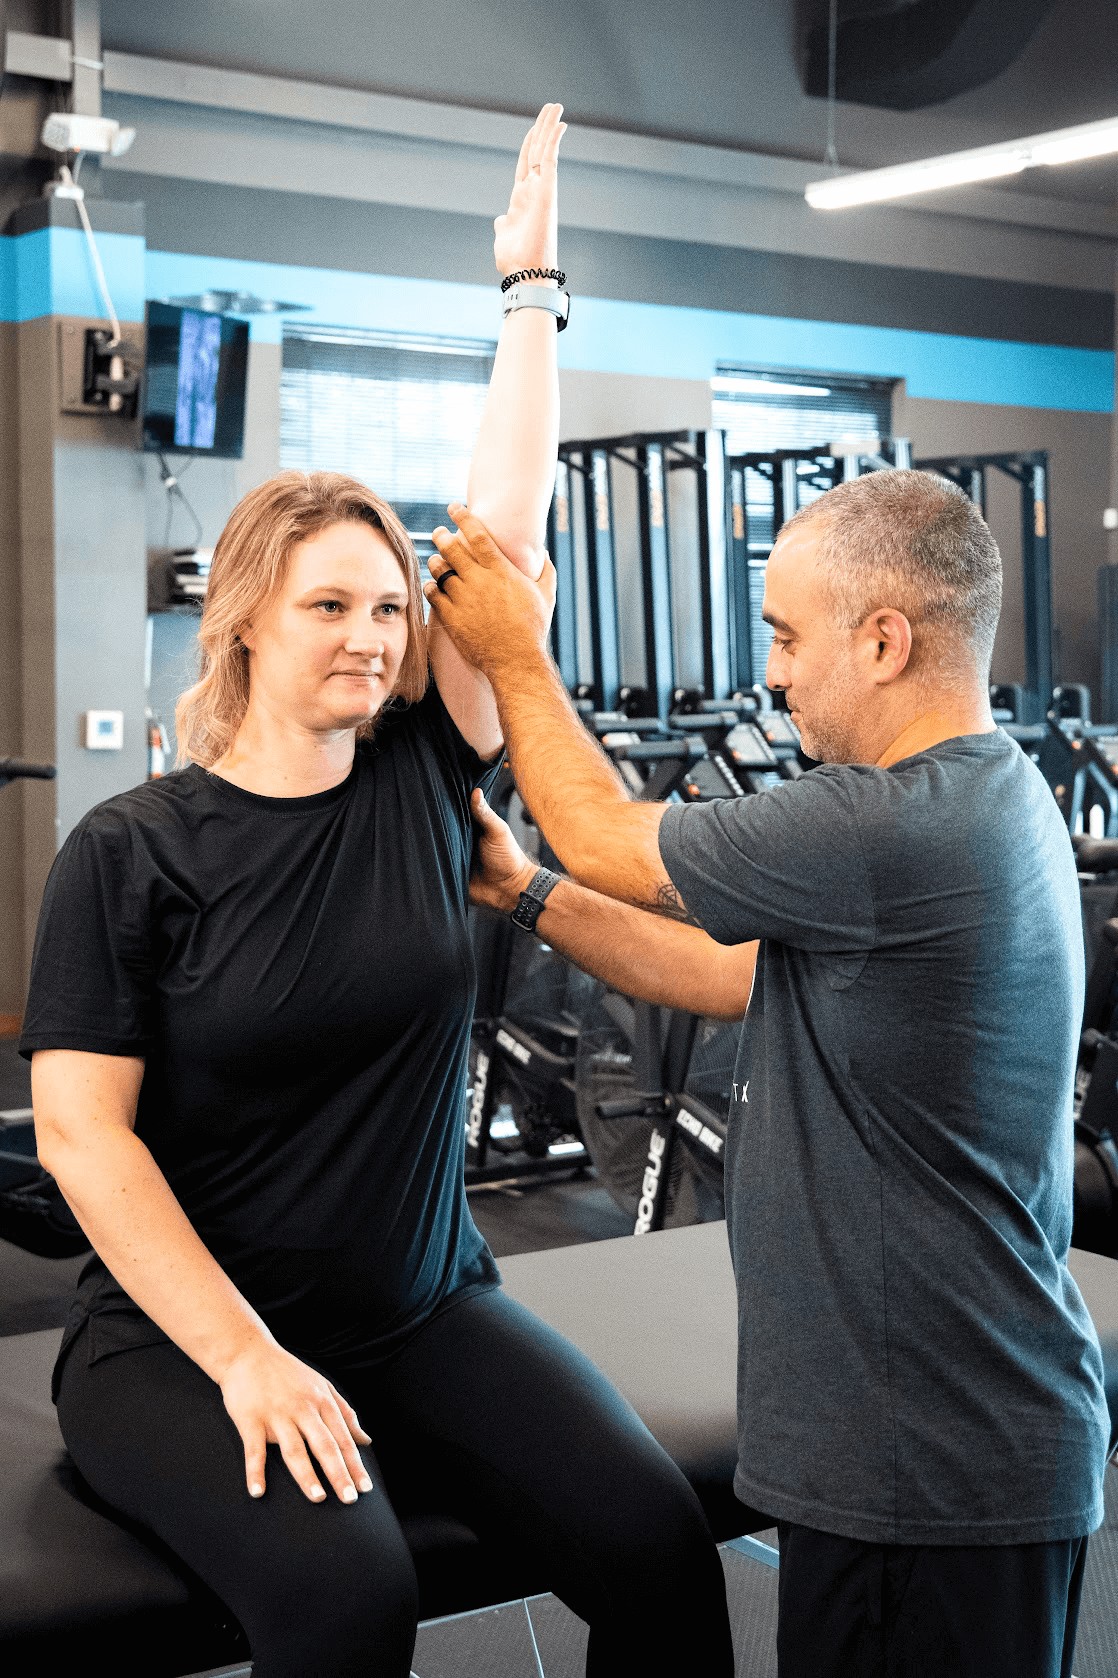 Dr. Romin Ghassemi, PT, DPT helping a patient work through a shoulder impingement by raising her left arm above her head while stabilizing it.